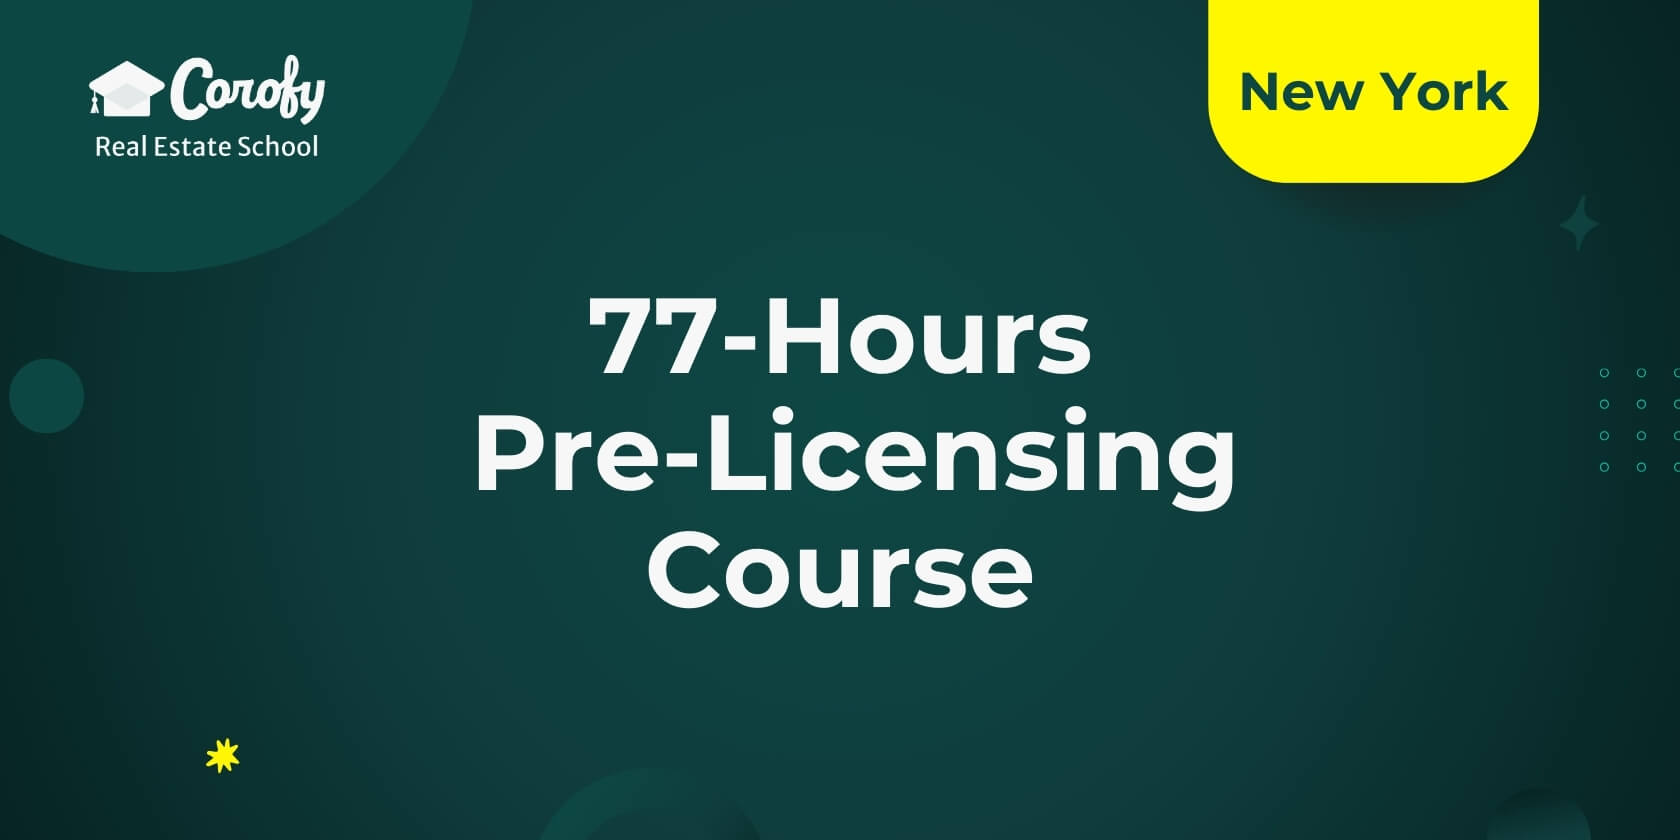 77-Hours Pre-Licensing Course